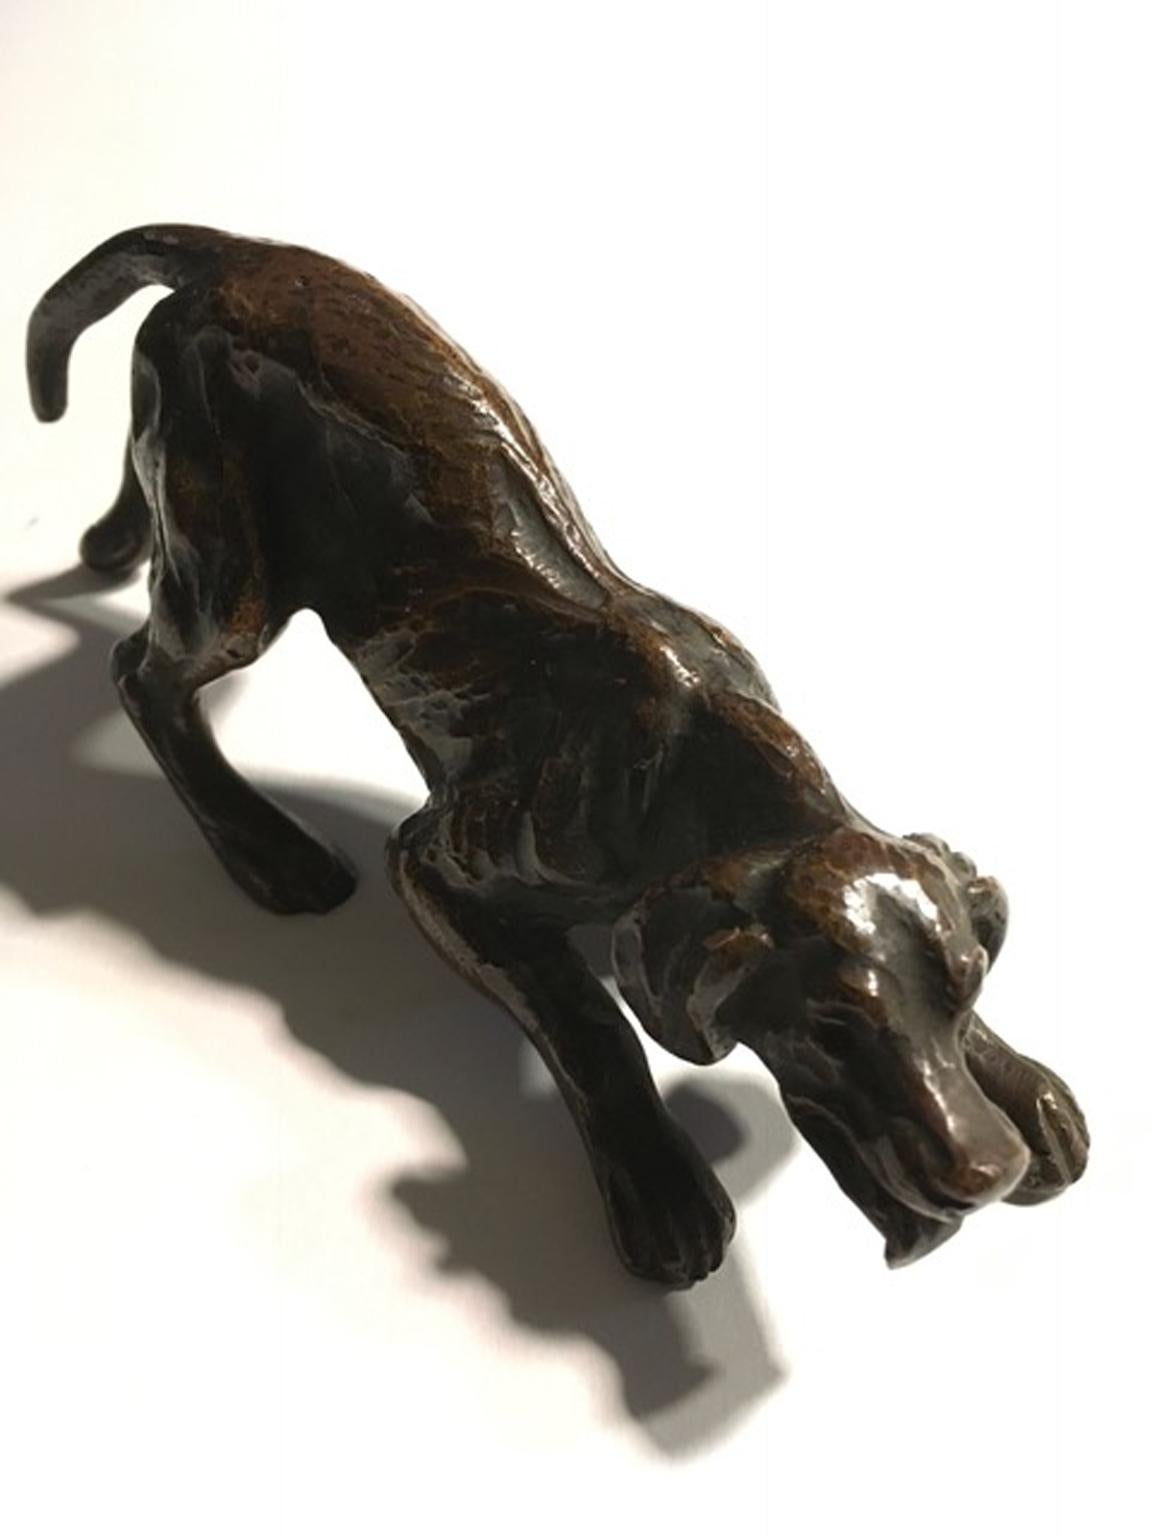 France late 19th century bronze dog sculpture attributed to Clovis Masson. 

This wonderful pair of bronze dogs were realized in circa 1850 by Clovis Masson specilized in this animal bronze sculptures cast in lost wax. 

Masson was one of the